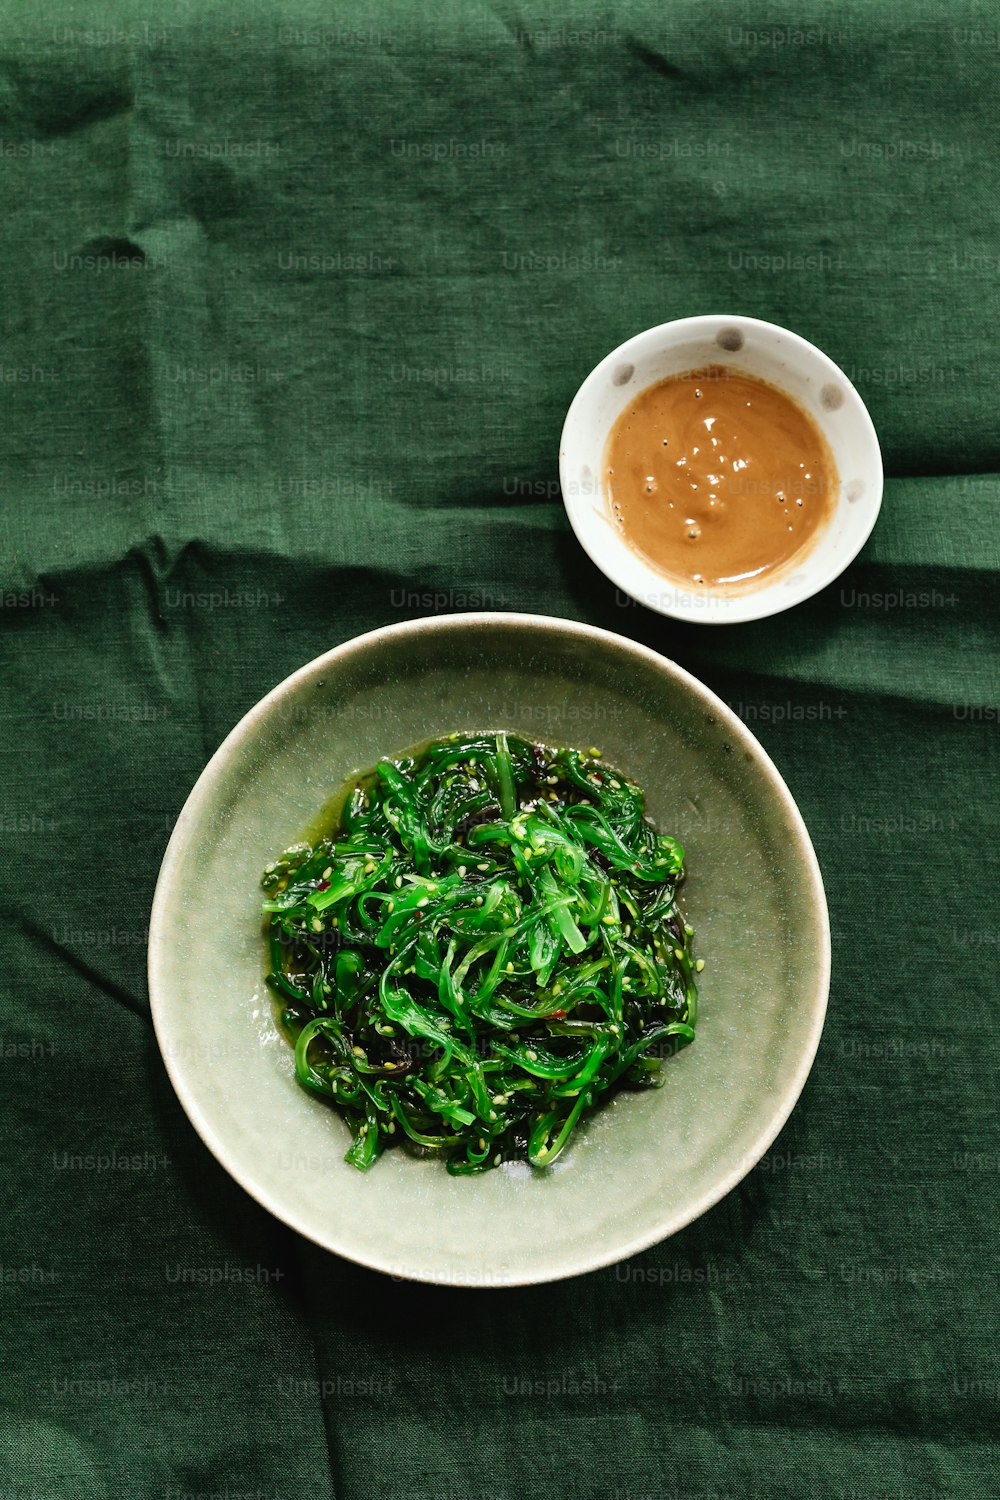 a white bowl filled with greens next to a bowl of sauce